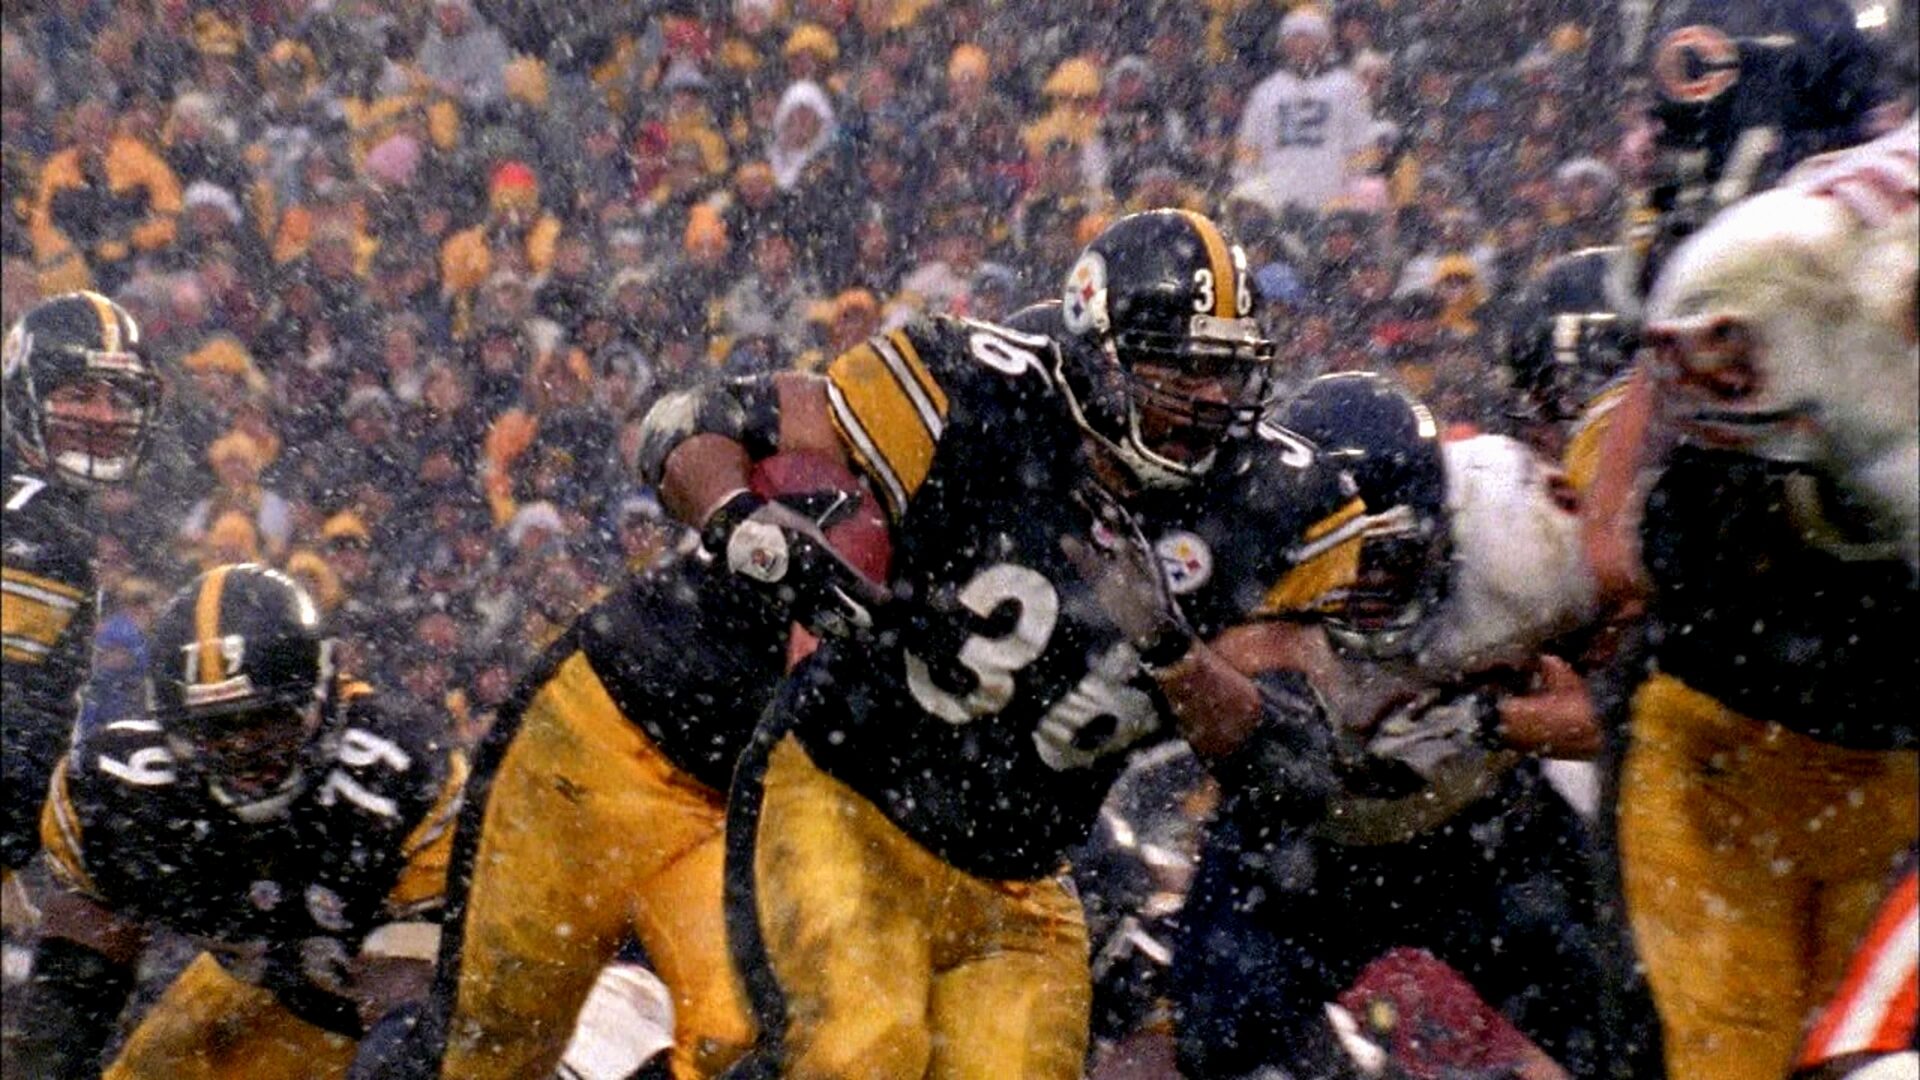 Steelers Throwback Thursday: Bus outruns Bears in snow - Steel